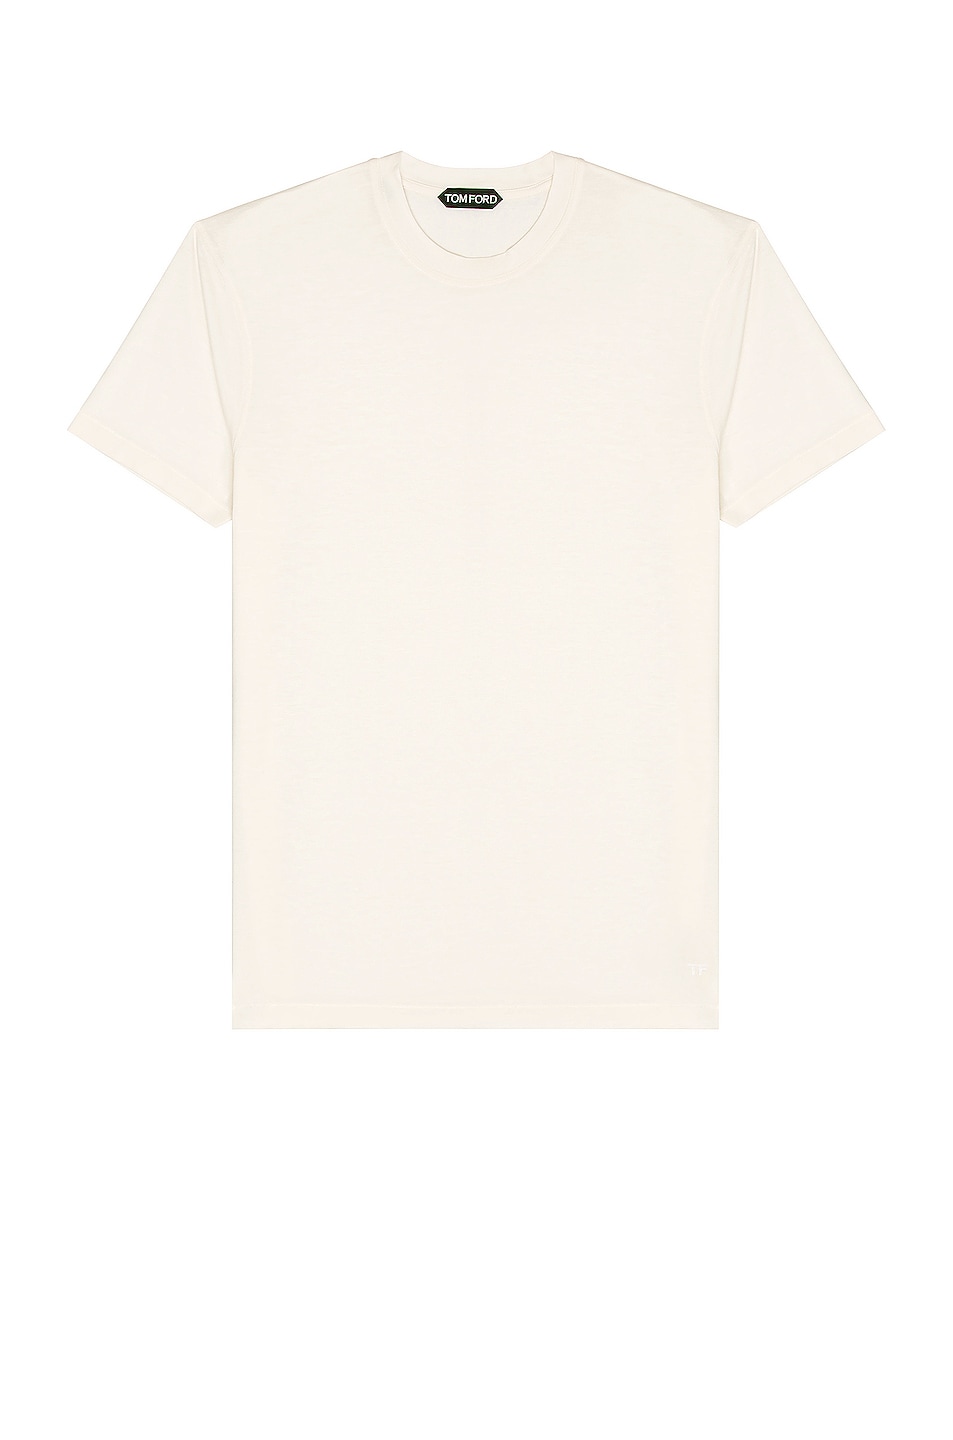 Image 1 of TOM FORD Viscose Cotton T-Shirt in Natural